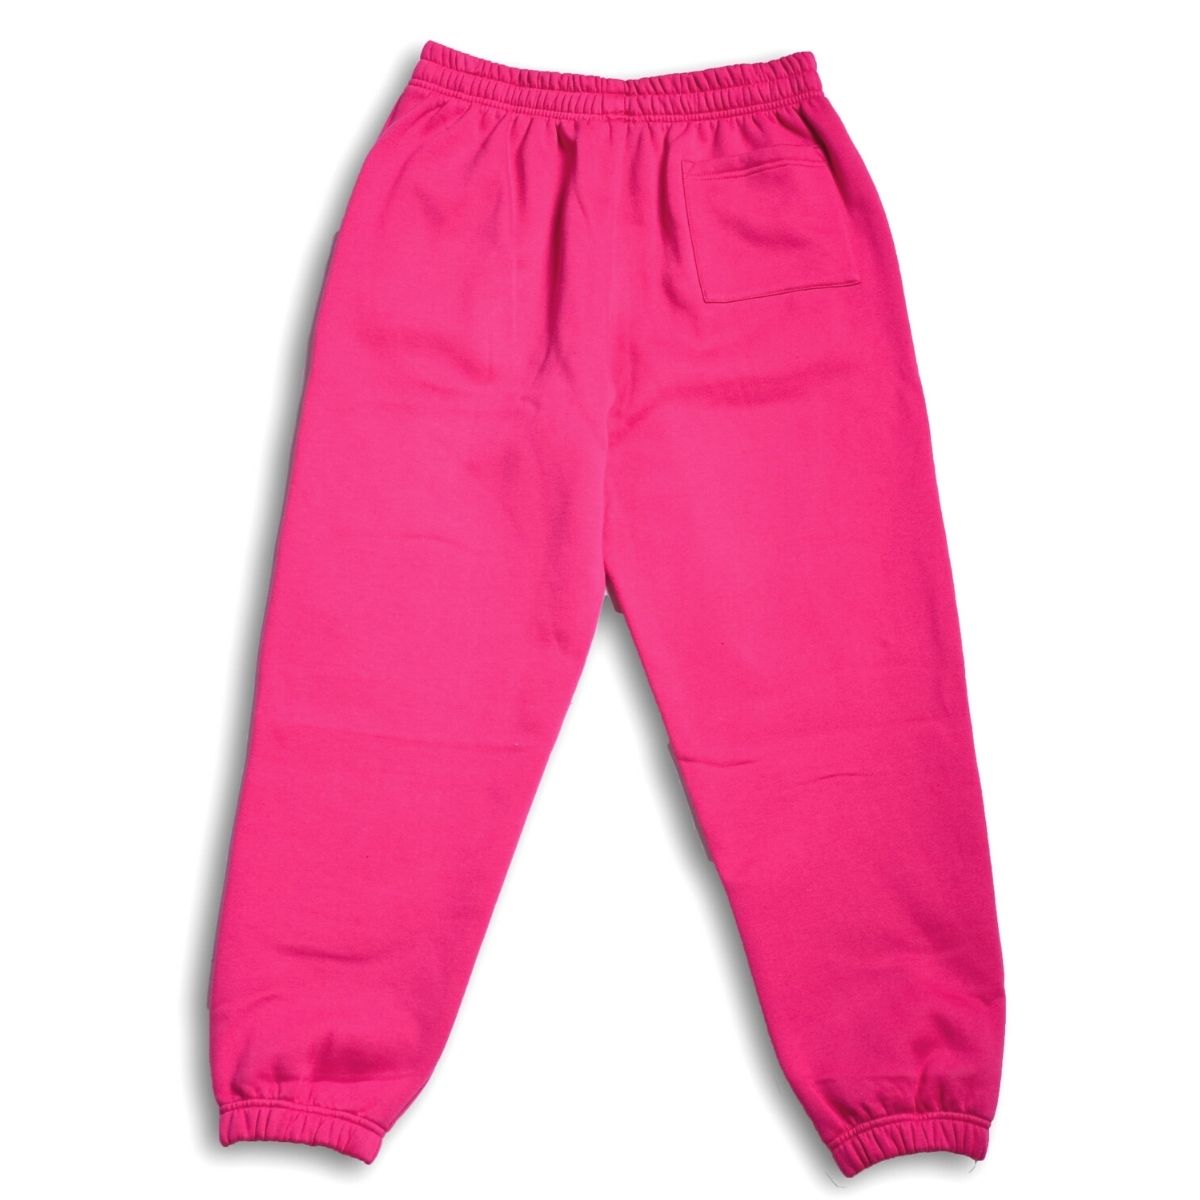 Hot Pink Rhinestone Sweats: Barbed Wire Smiley Face – Beyond Lost NYC